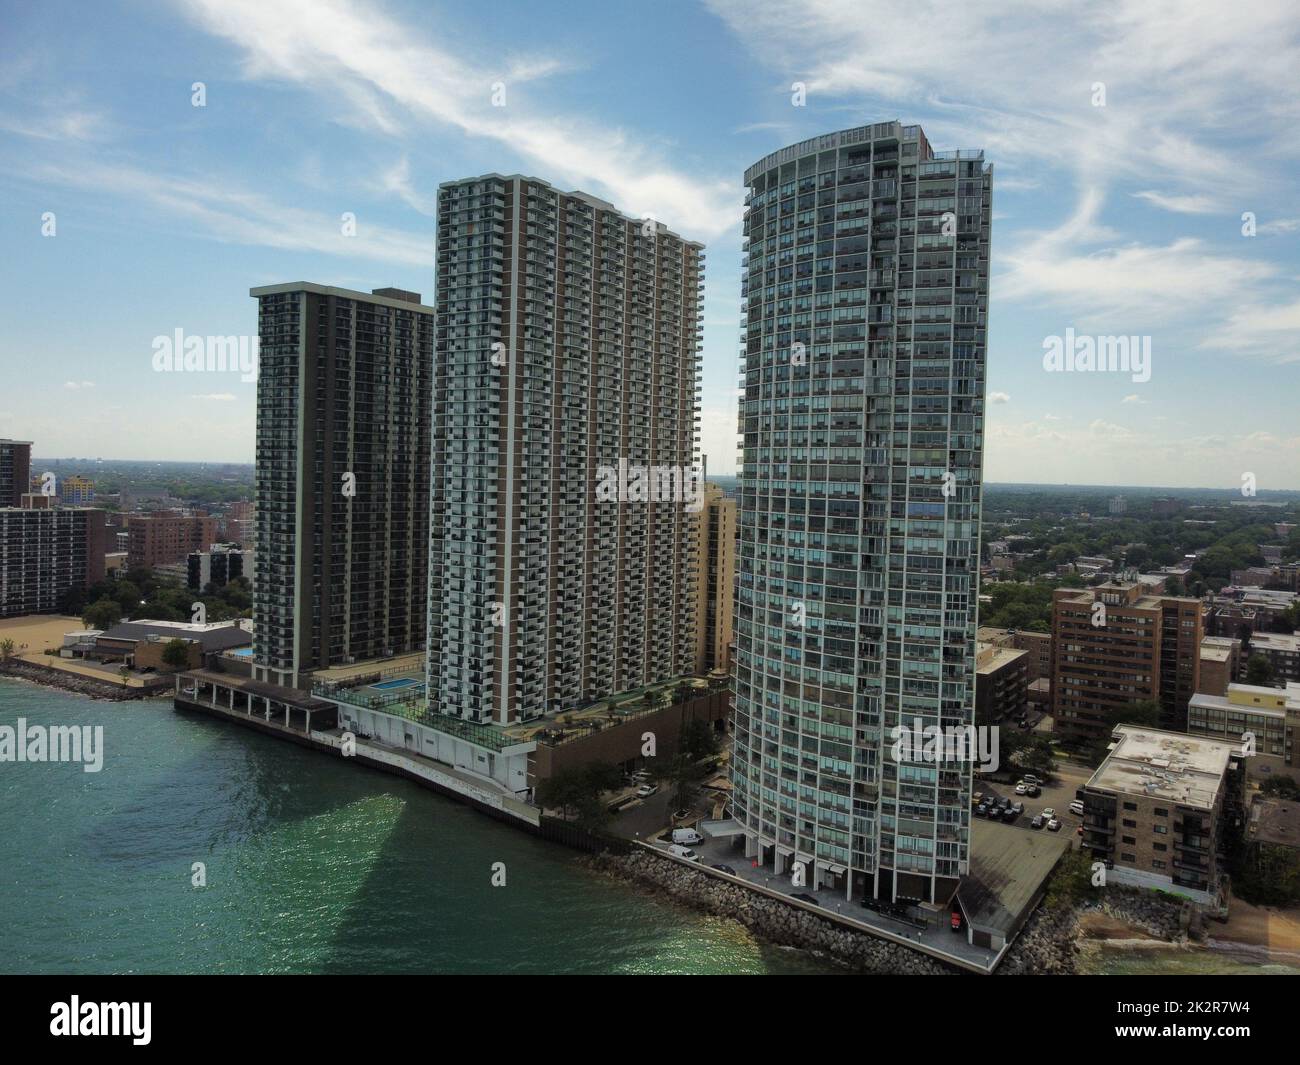 A drone view of high residential buildings in Chicago, Edgewater neighborhood Stock Photo